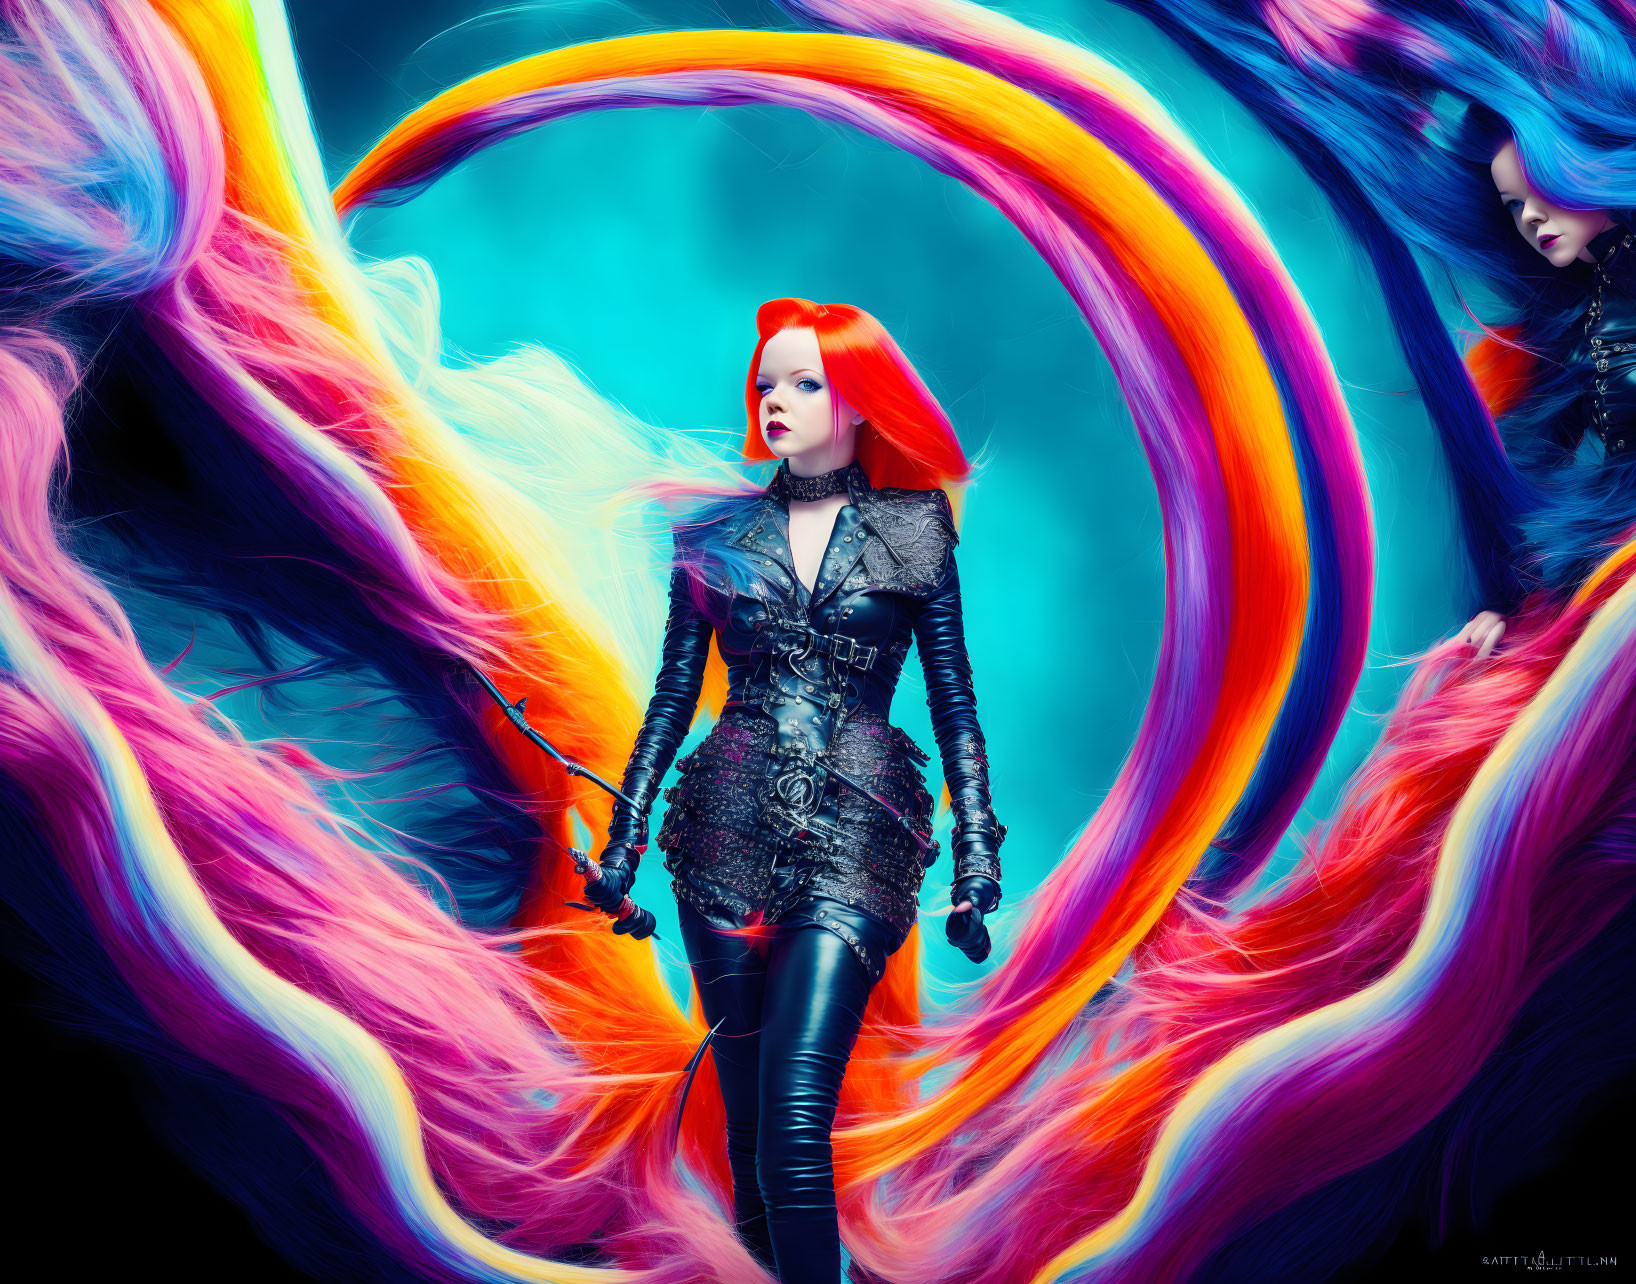 Colorful digital artwork: Red-haired woman in gothic attire surrounded by neon lights